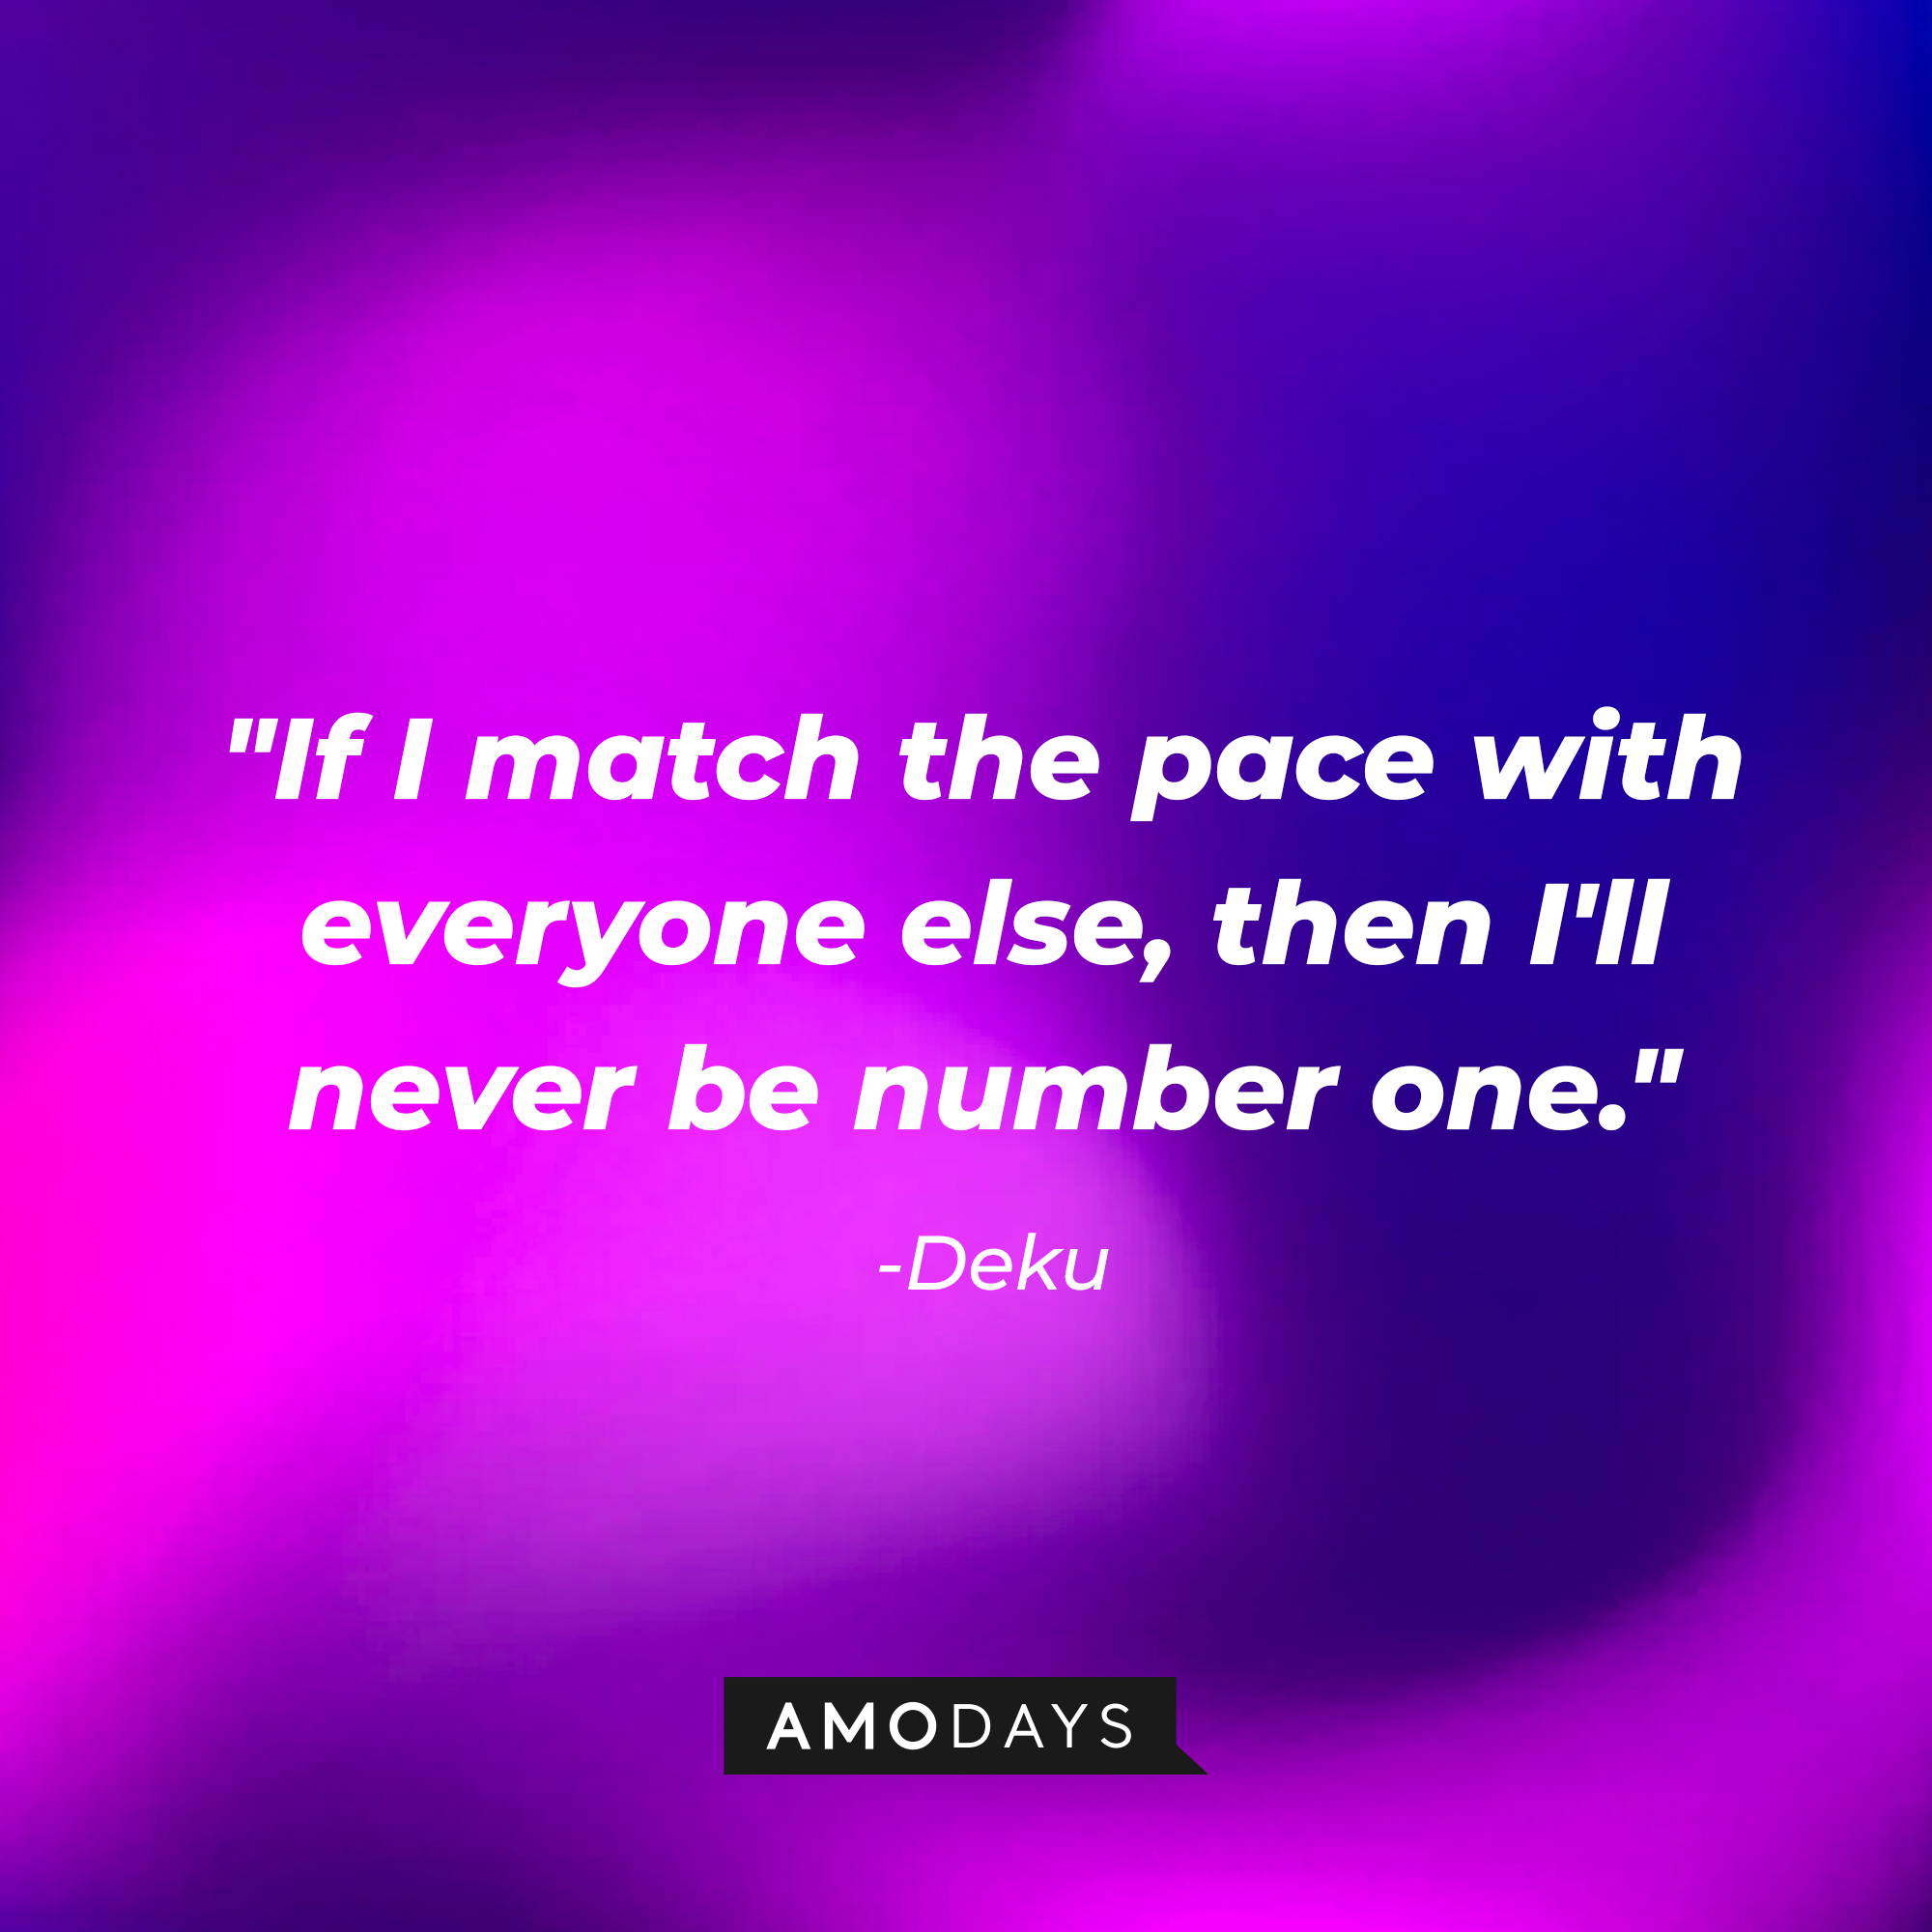 Deku's quote: "If I match the pace with everyone else, then I'll never be number one." | Source: AmoDays